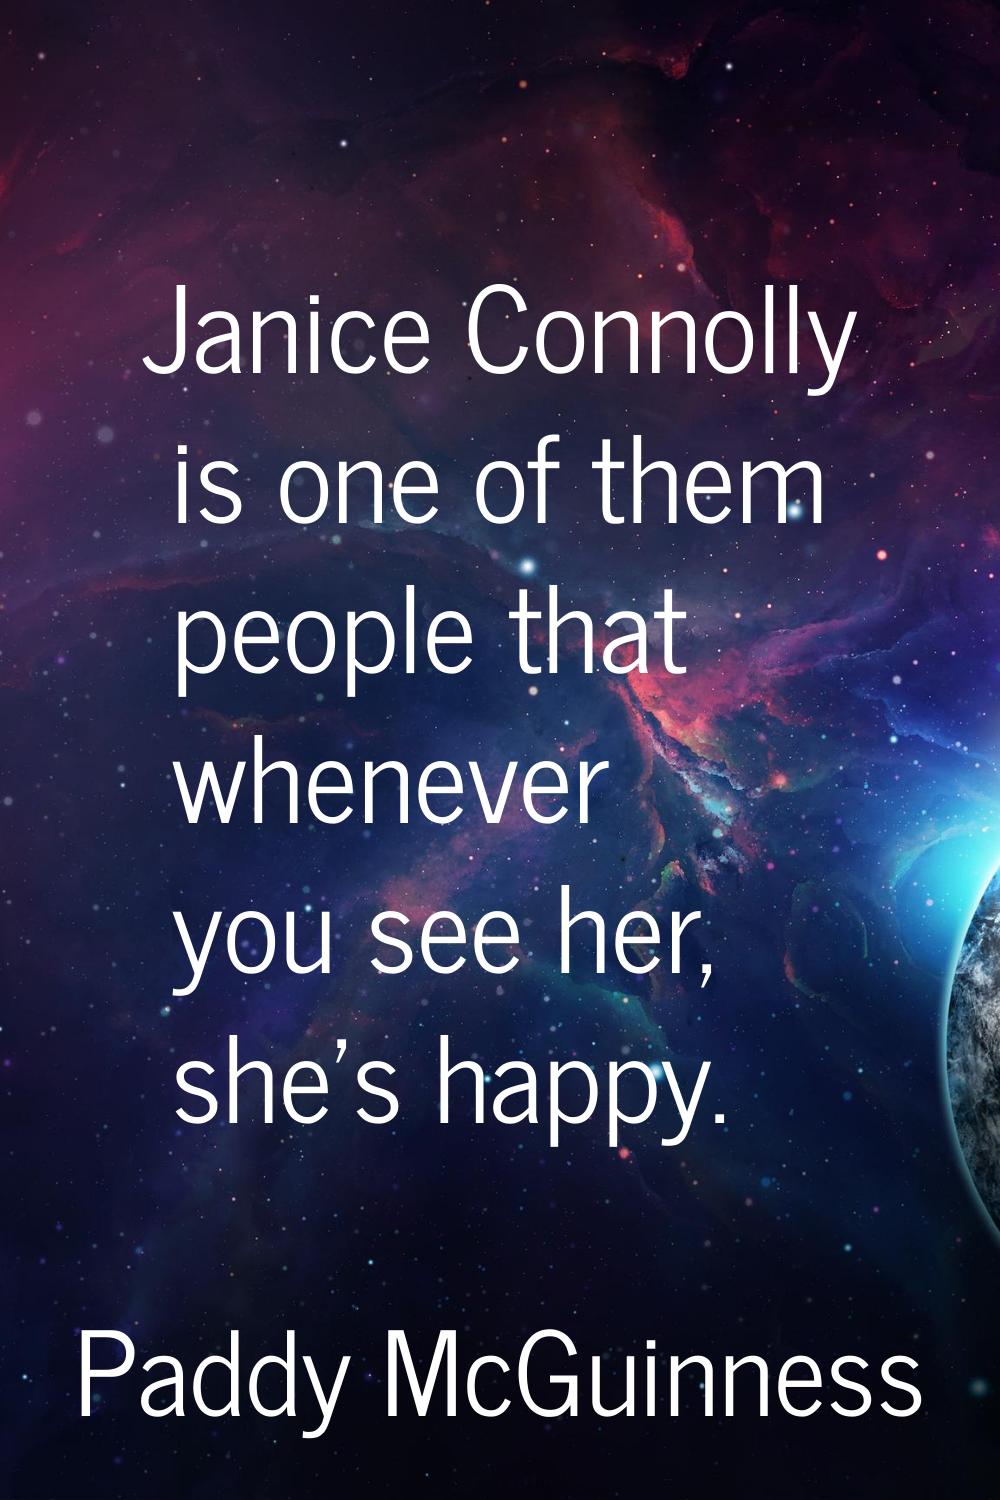 Janice Connolly is one of them people that whenever you see her, she’s happy.